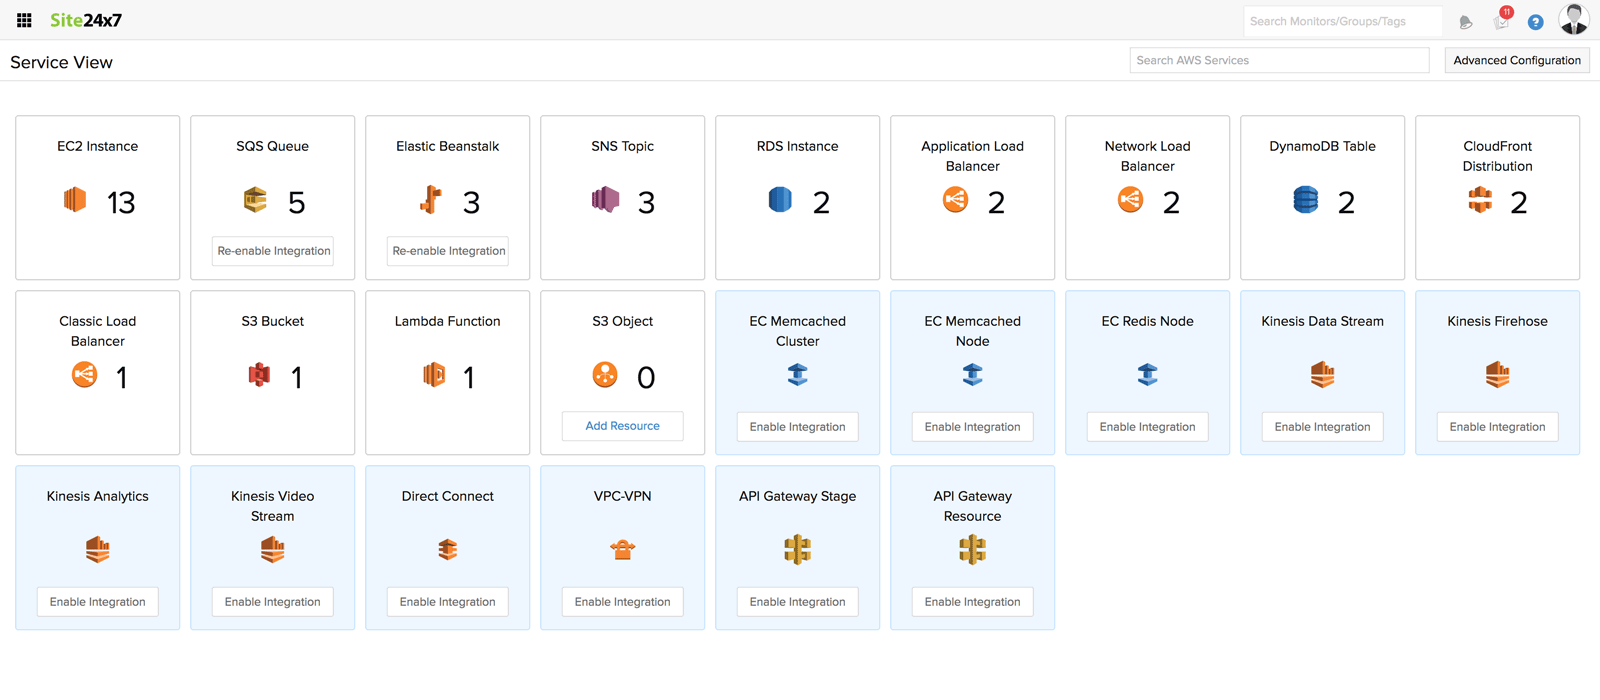 AWS monitoring solution with the service view